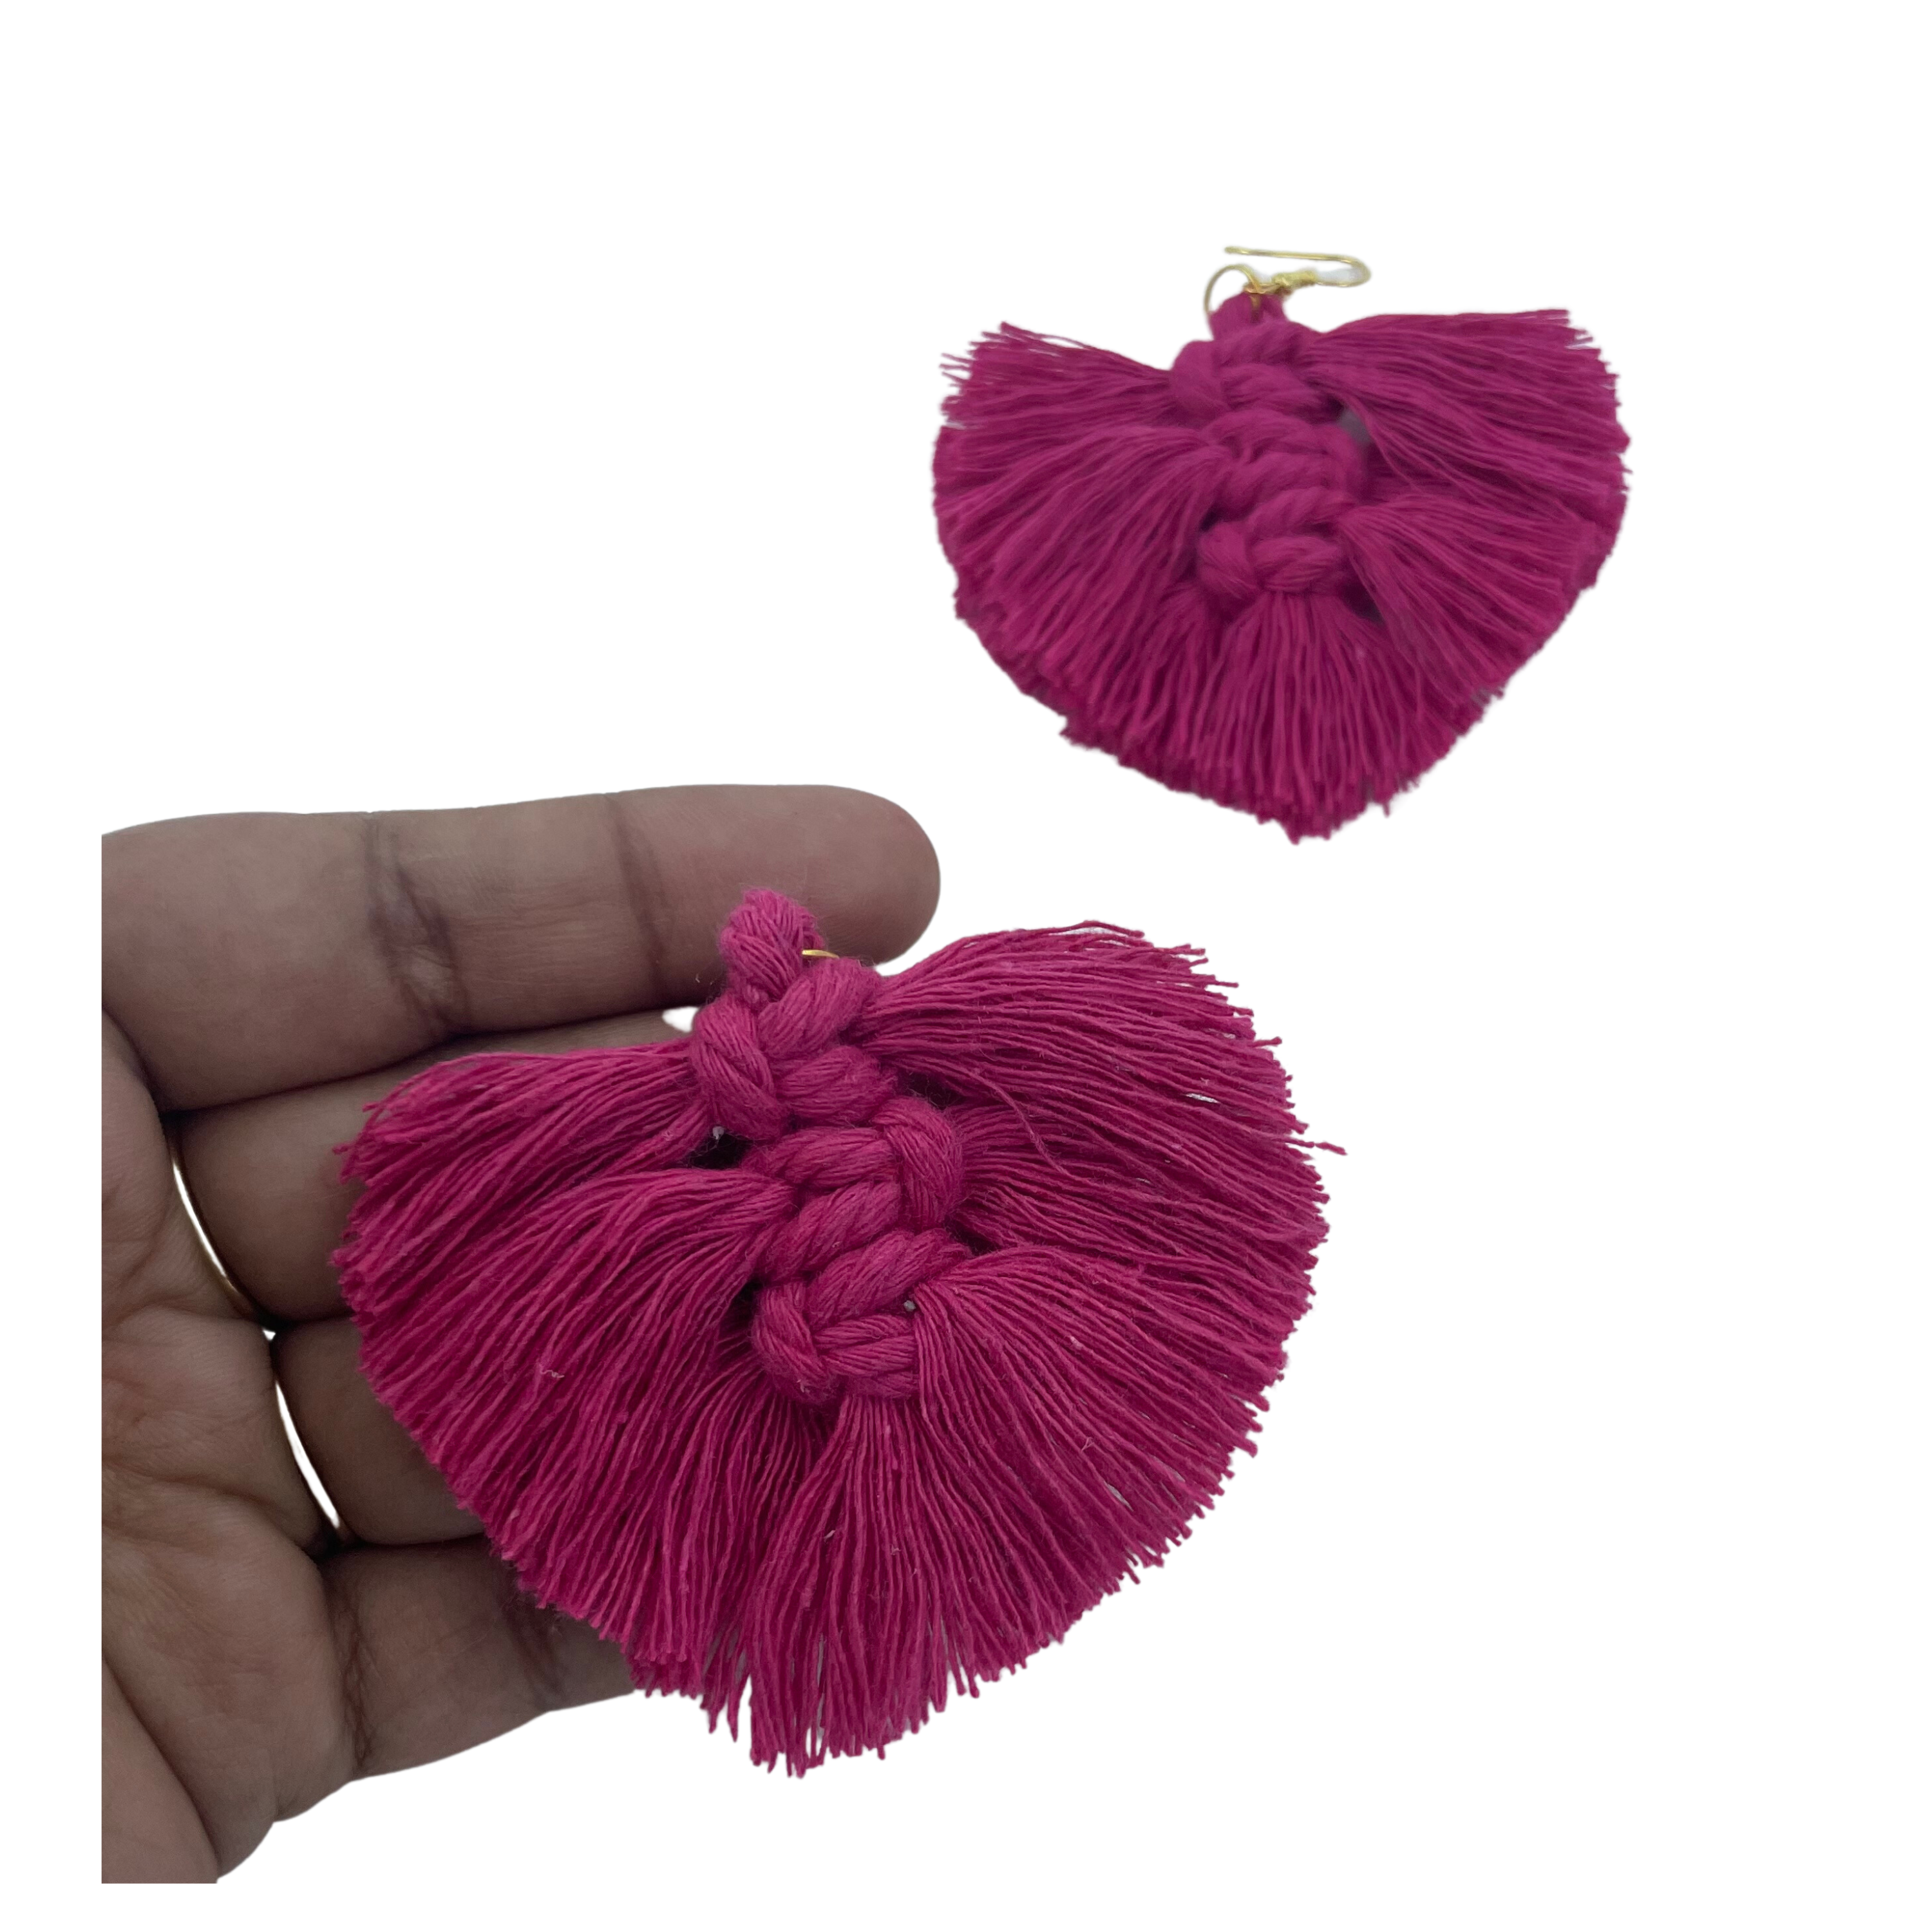 Haseena Hand-embroidered Tassel Earrings – Krafted with Happiness